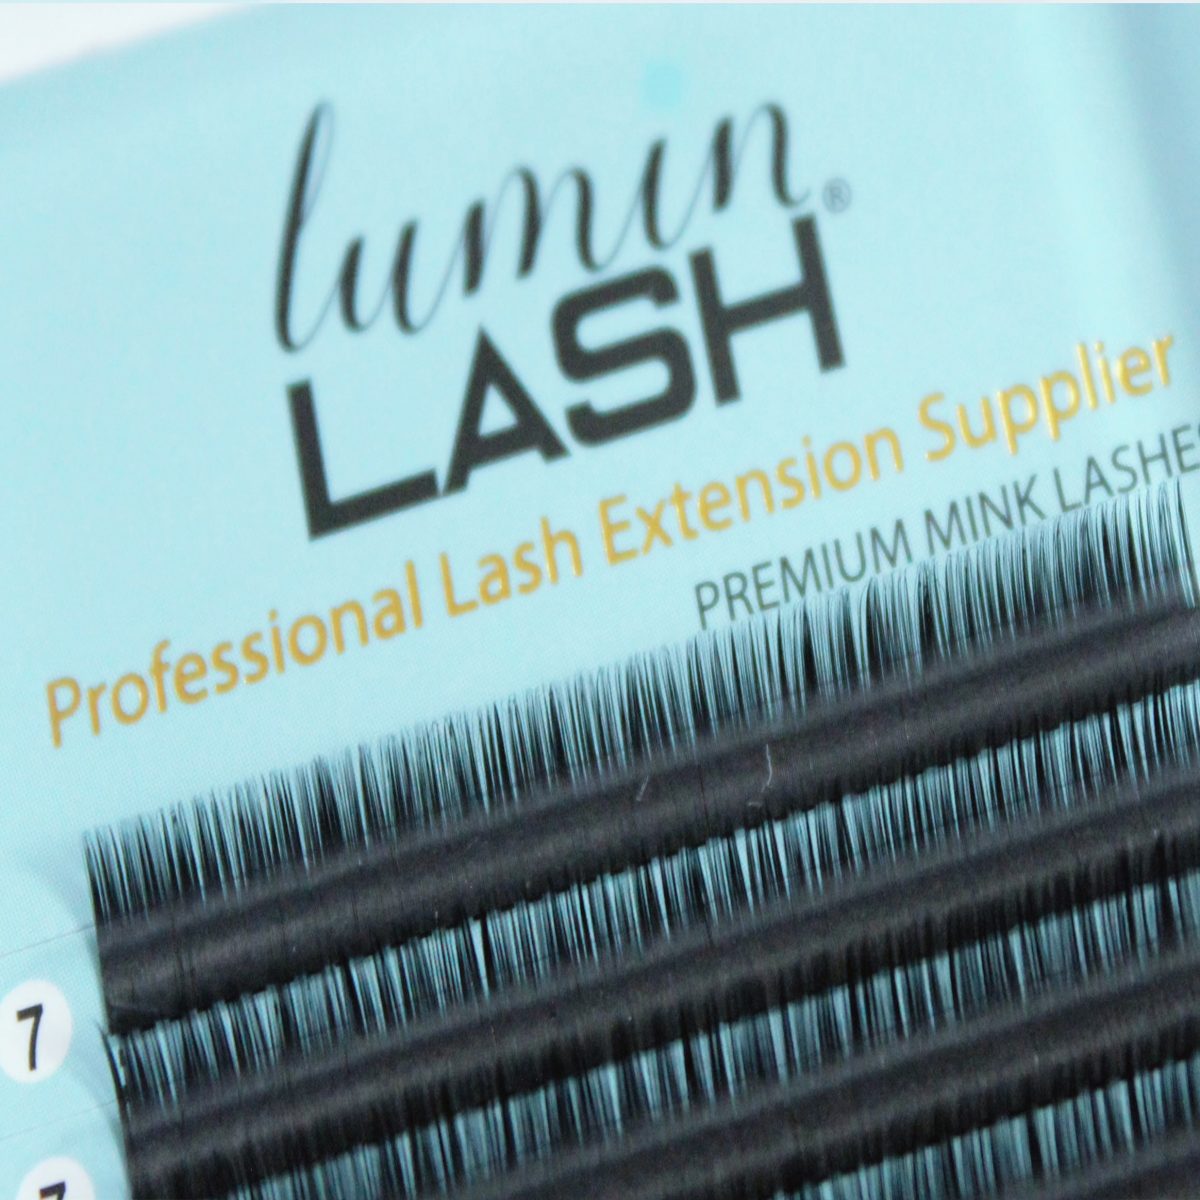 COLLECTION – Cashmere Mink Lashes 0.15